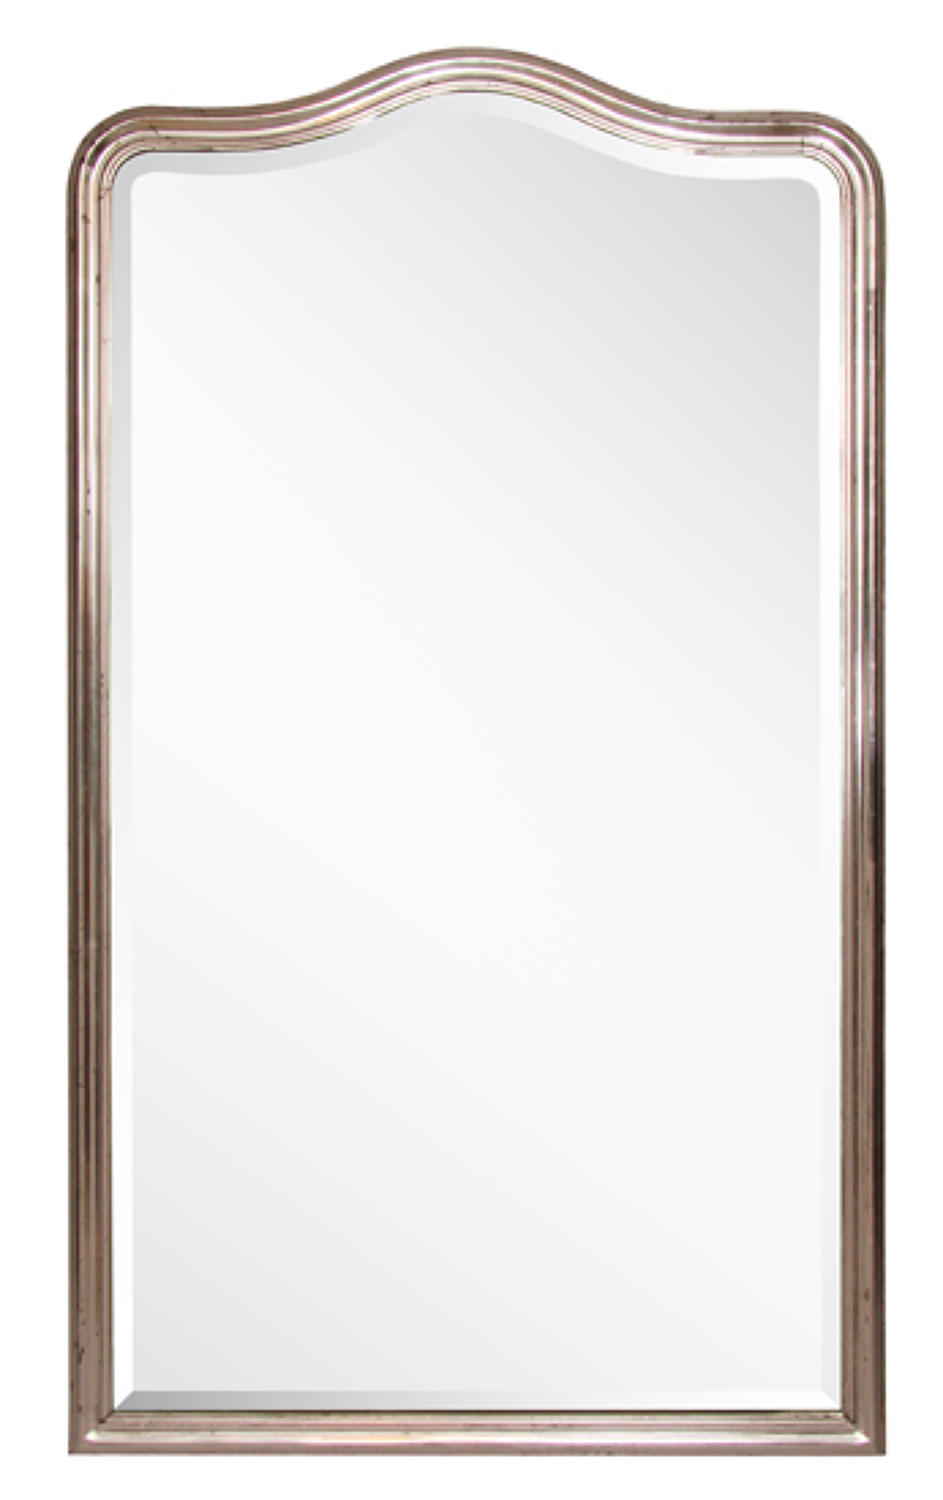 1860's French Silver Gilt Mirror with Original Bevelled Glass